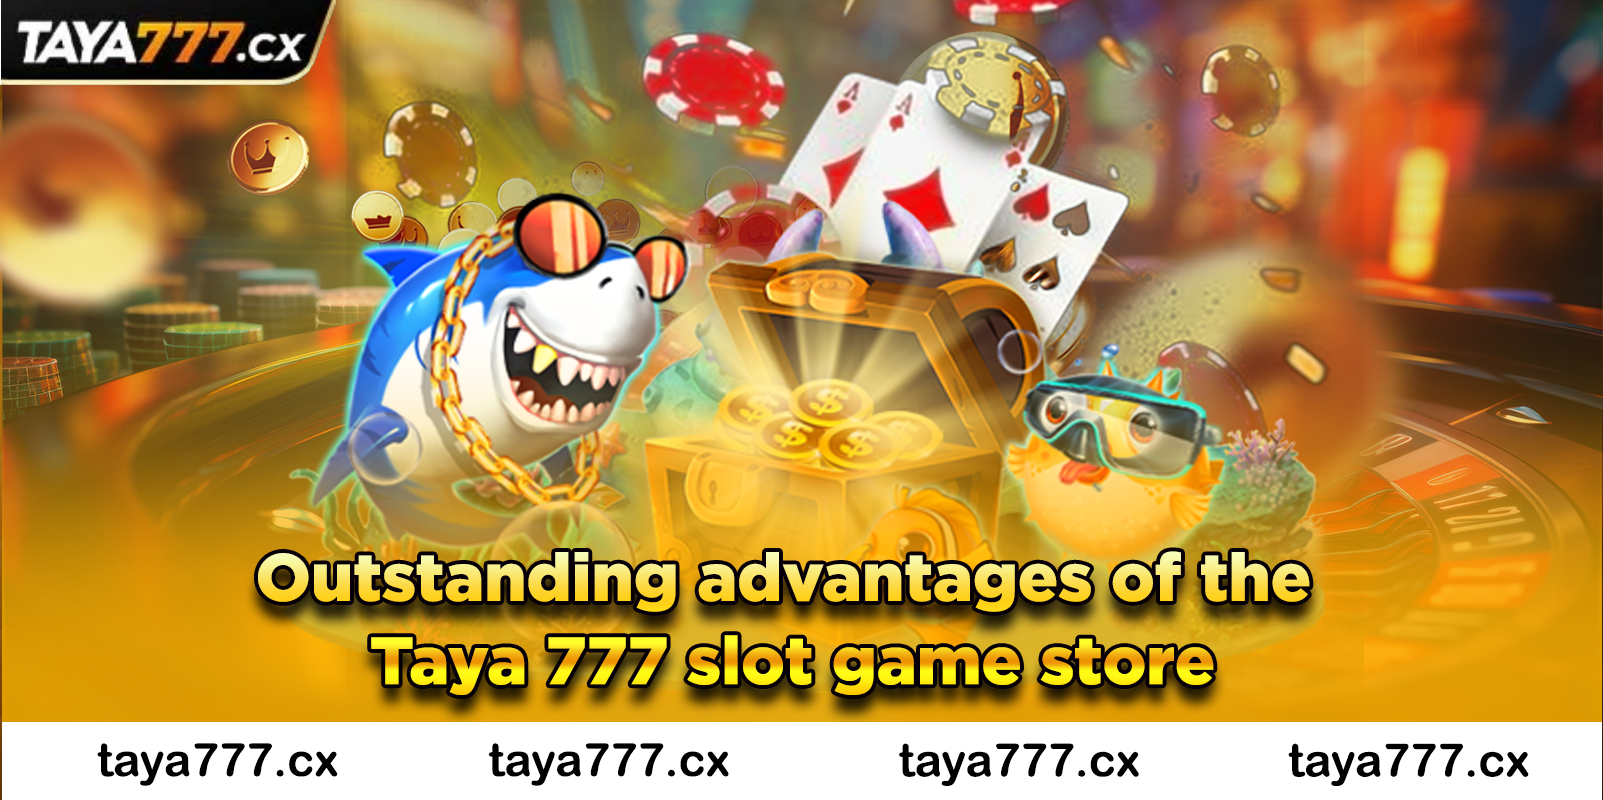 Outstanding advantages of the Taya 777 slot game store